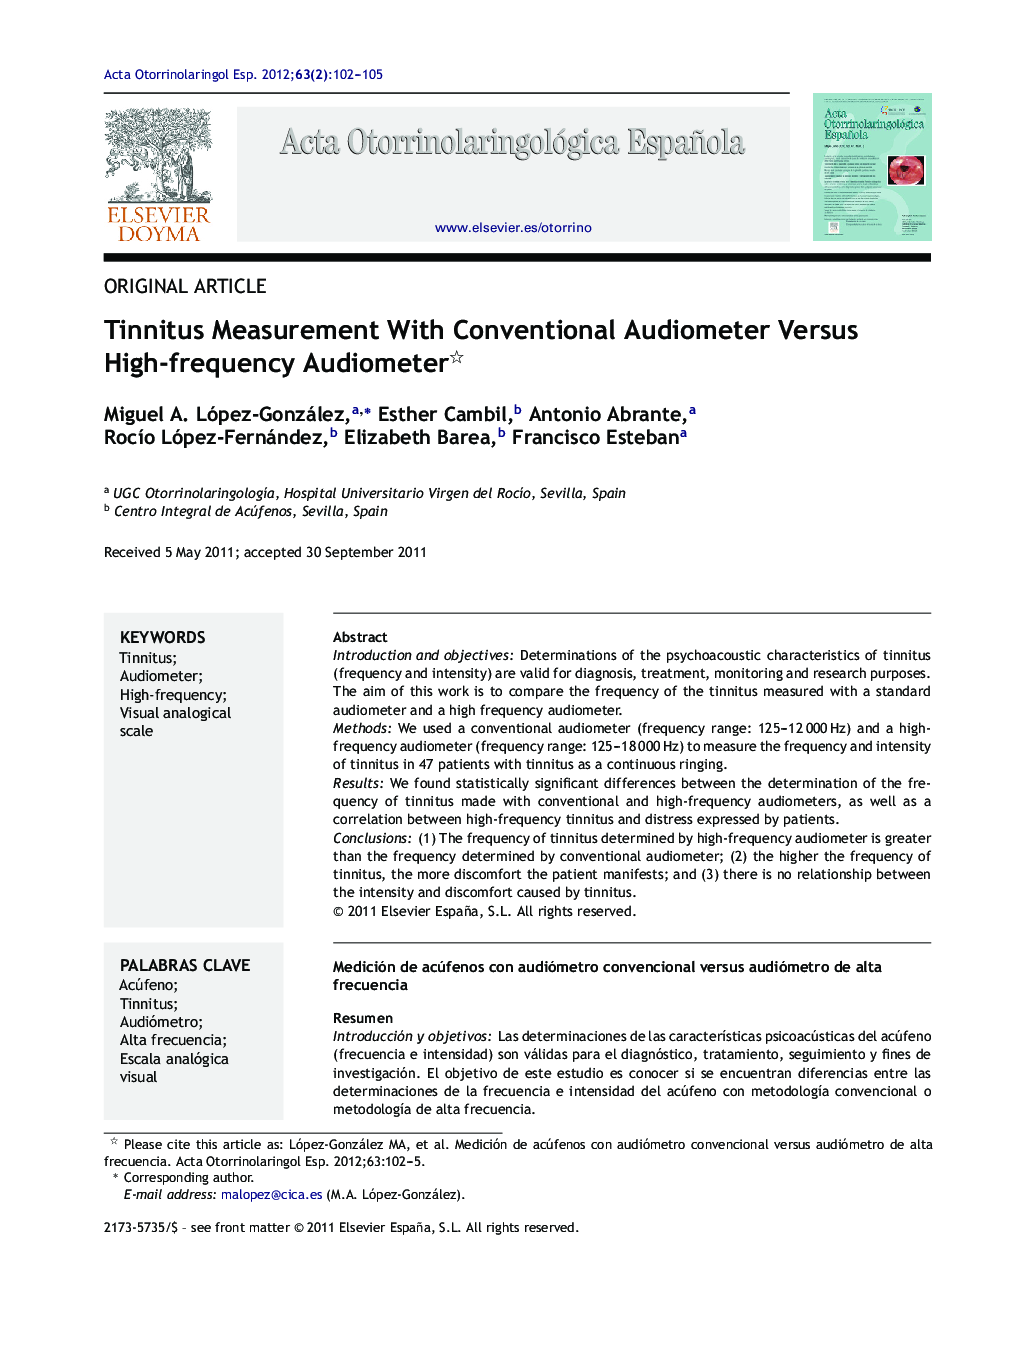 Tinnitus Measurement With Conventional Audiometer Versus High-frequency Audiometer 